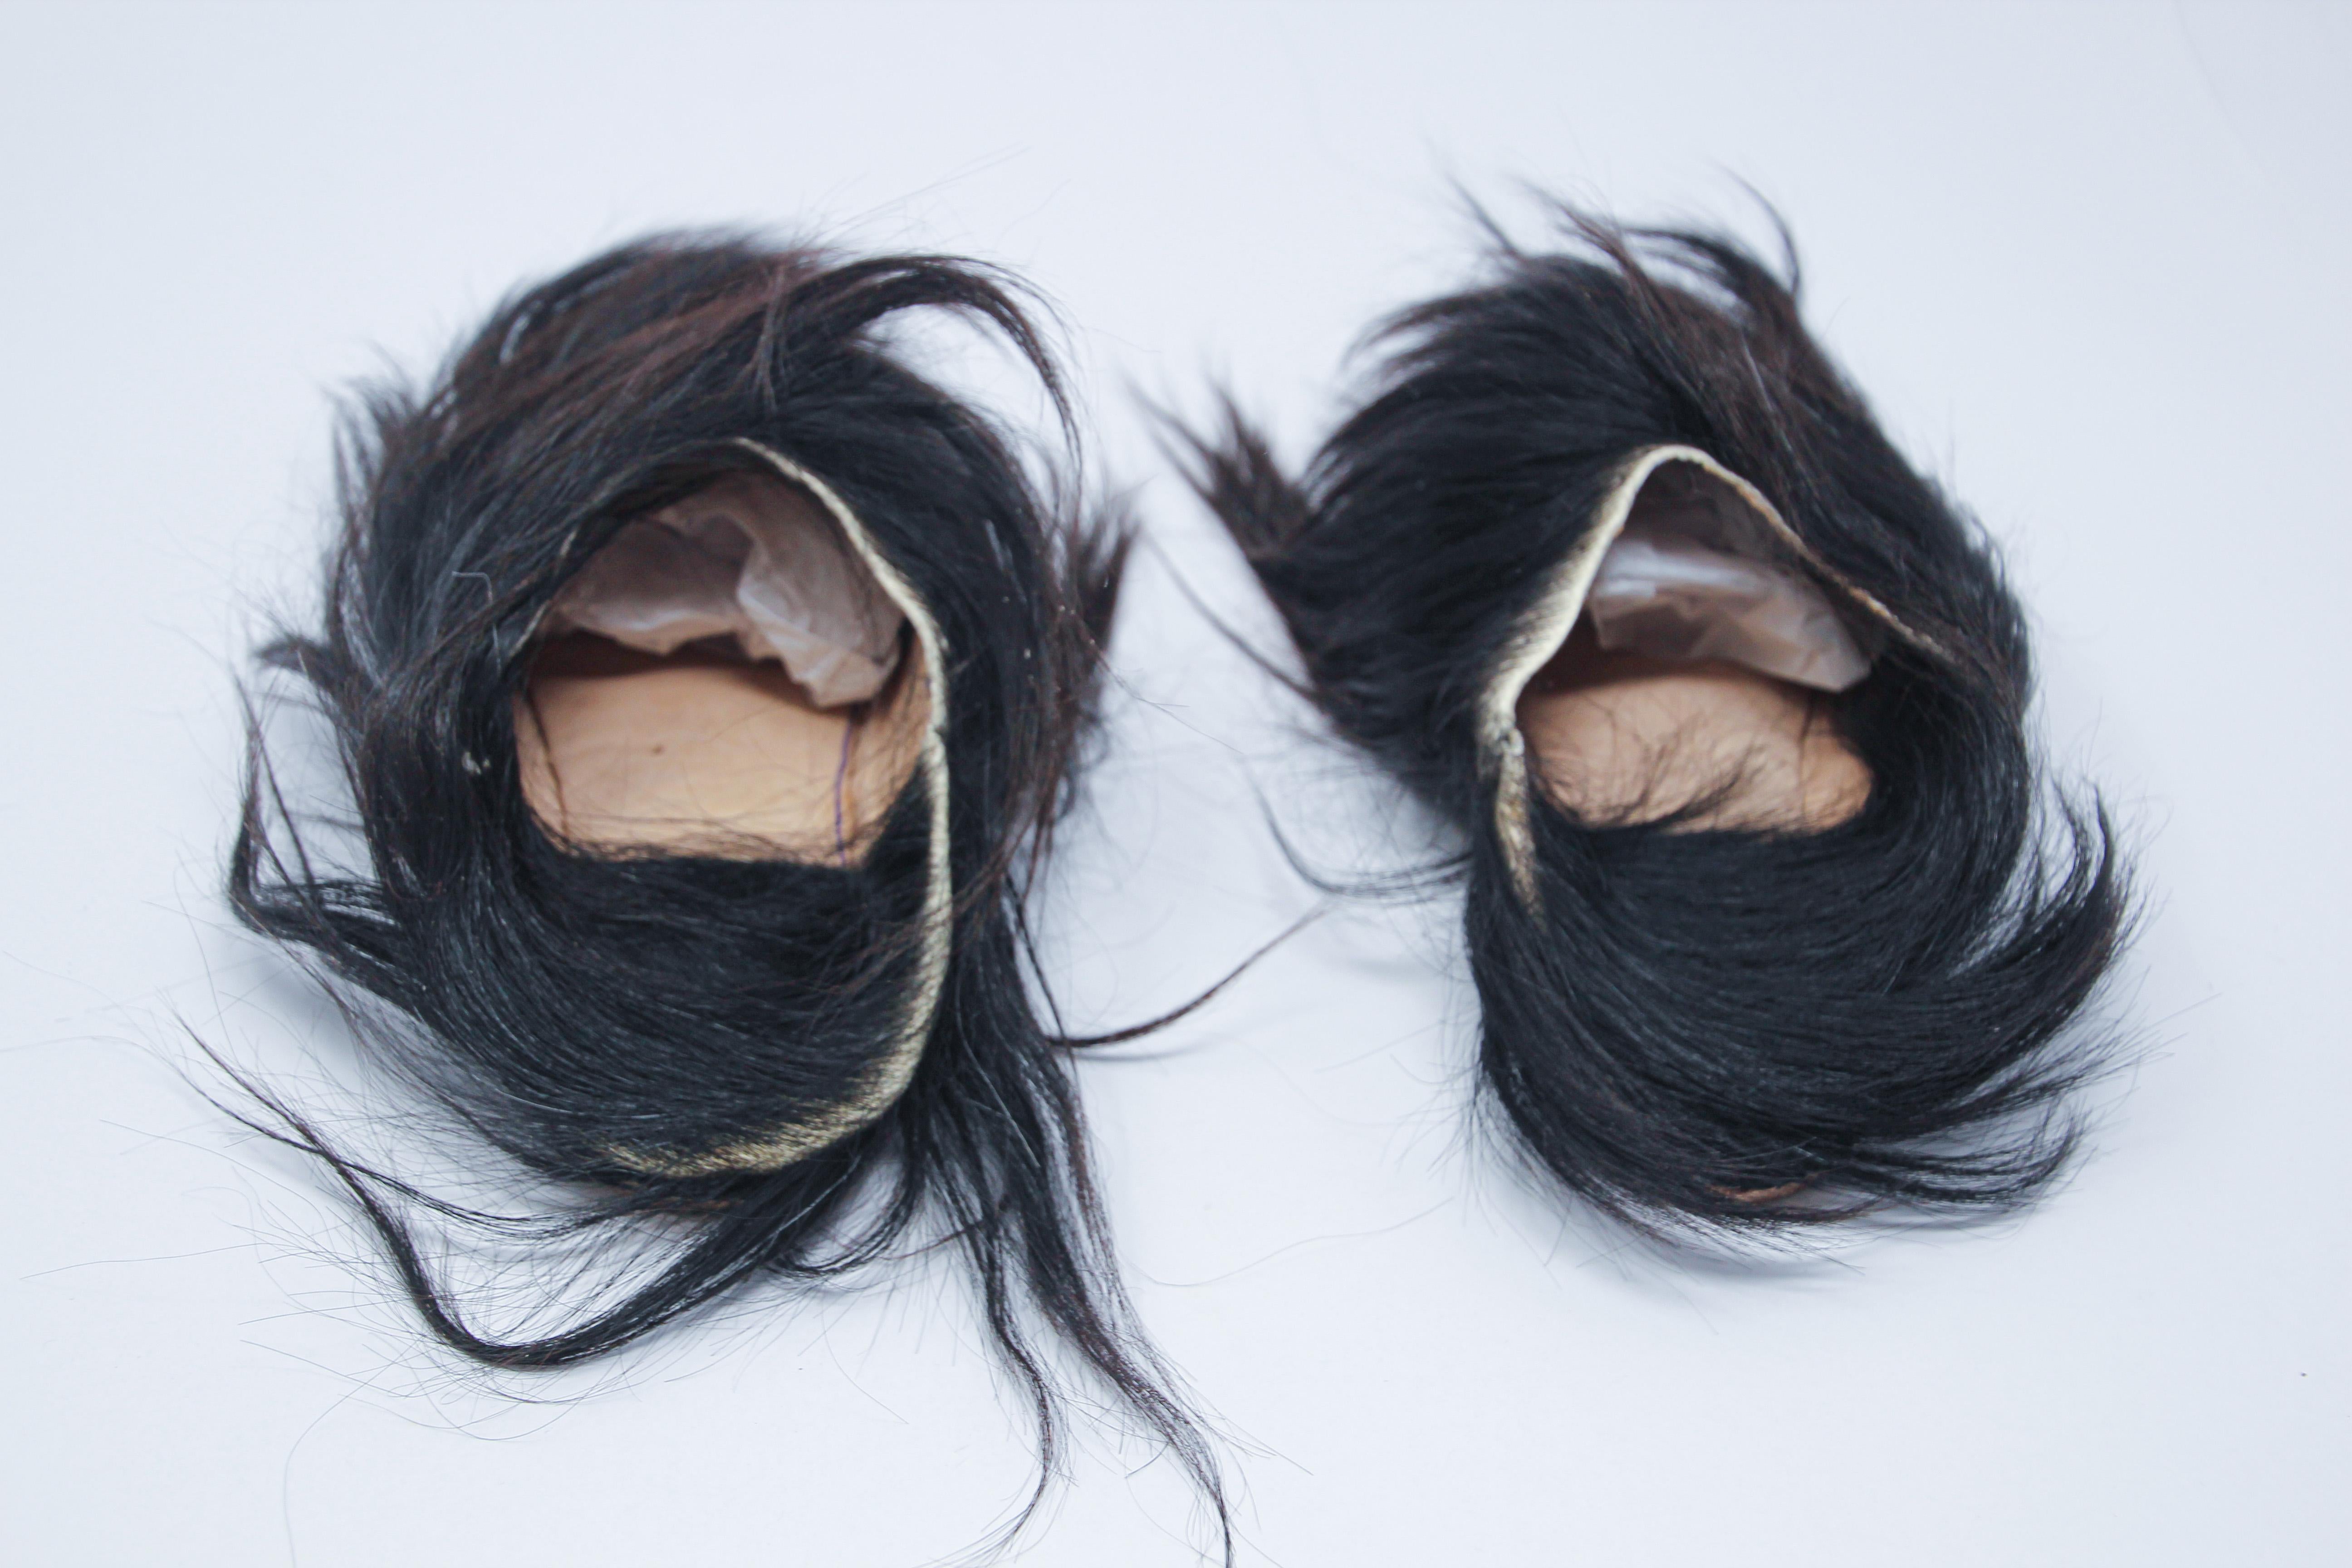 gucci goat hair slippers